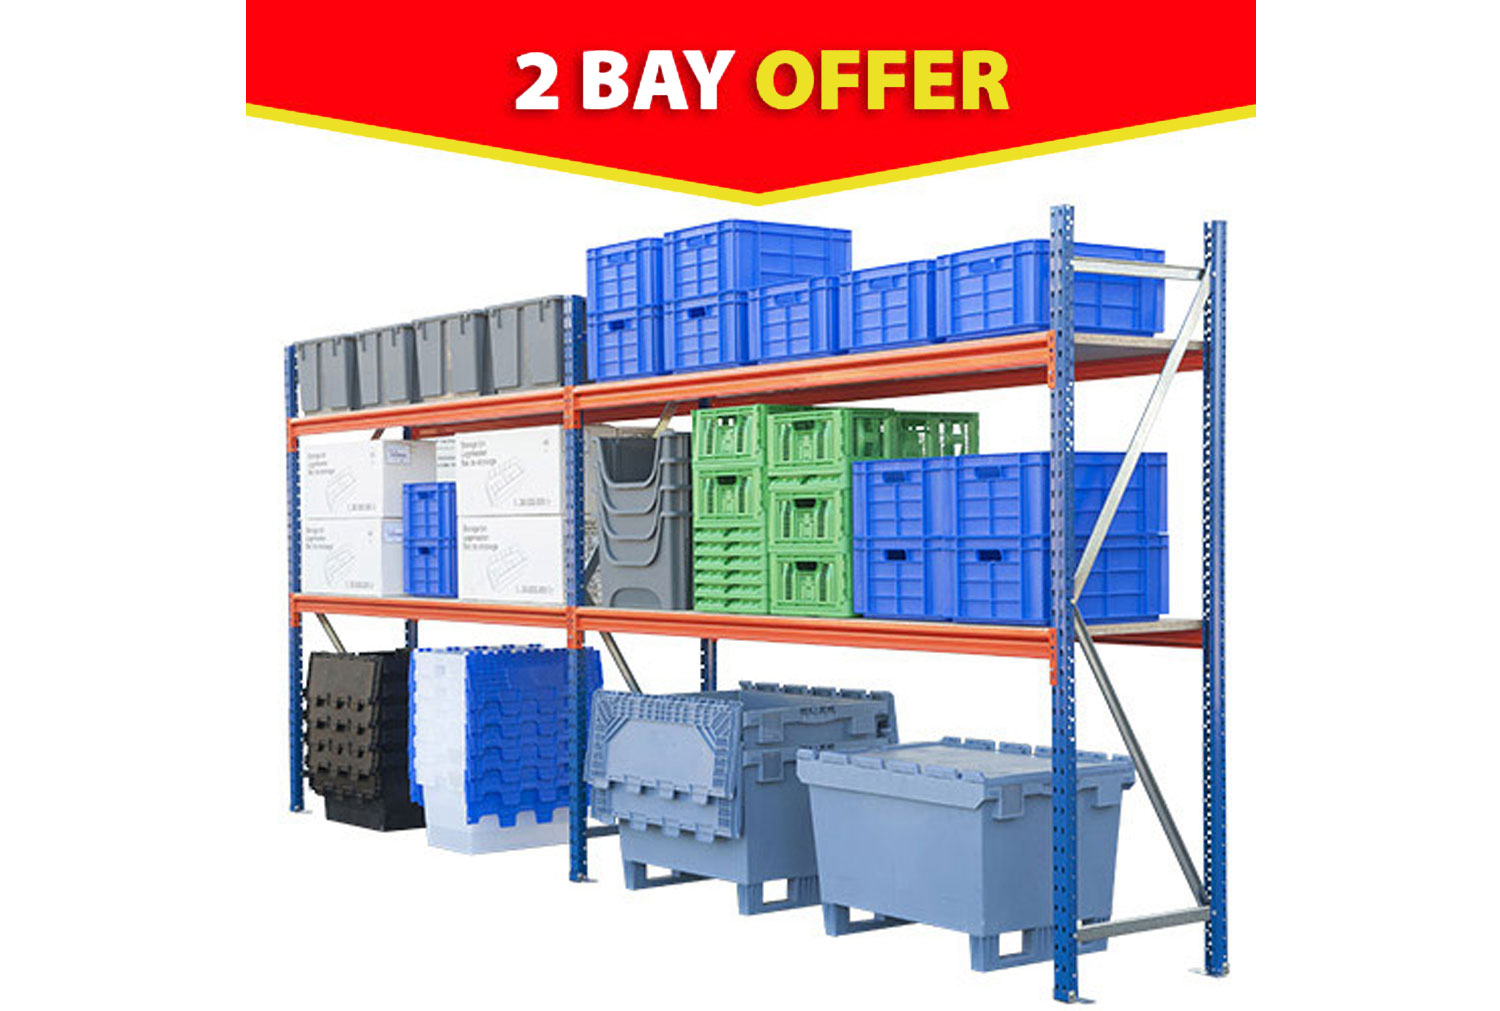 Rapid Span Shelving 2 Bay Bundle Deal 5628wx2000h, 5628wx600dx2000h (mm), Express Delivery